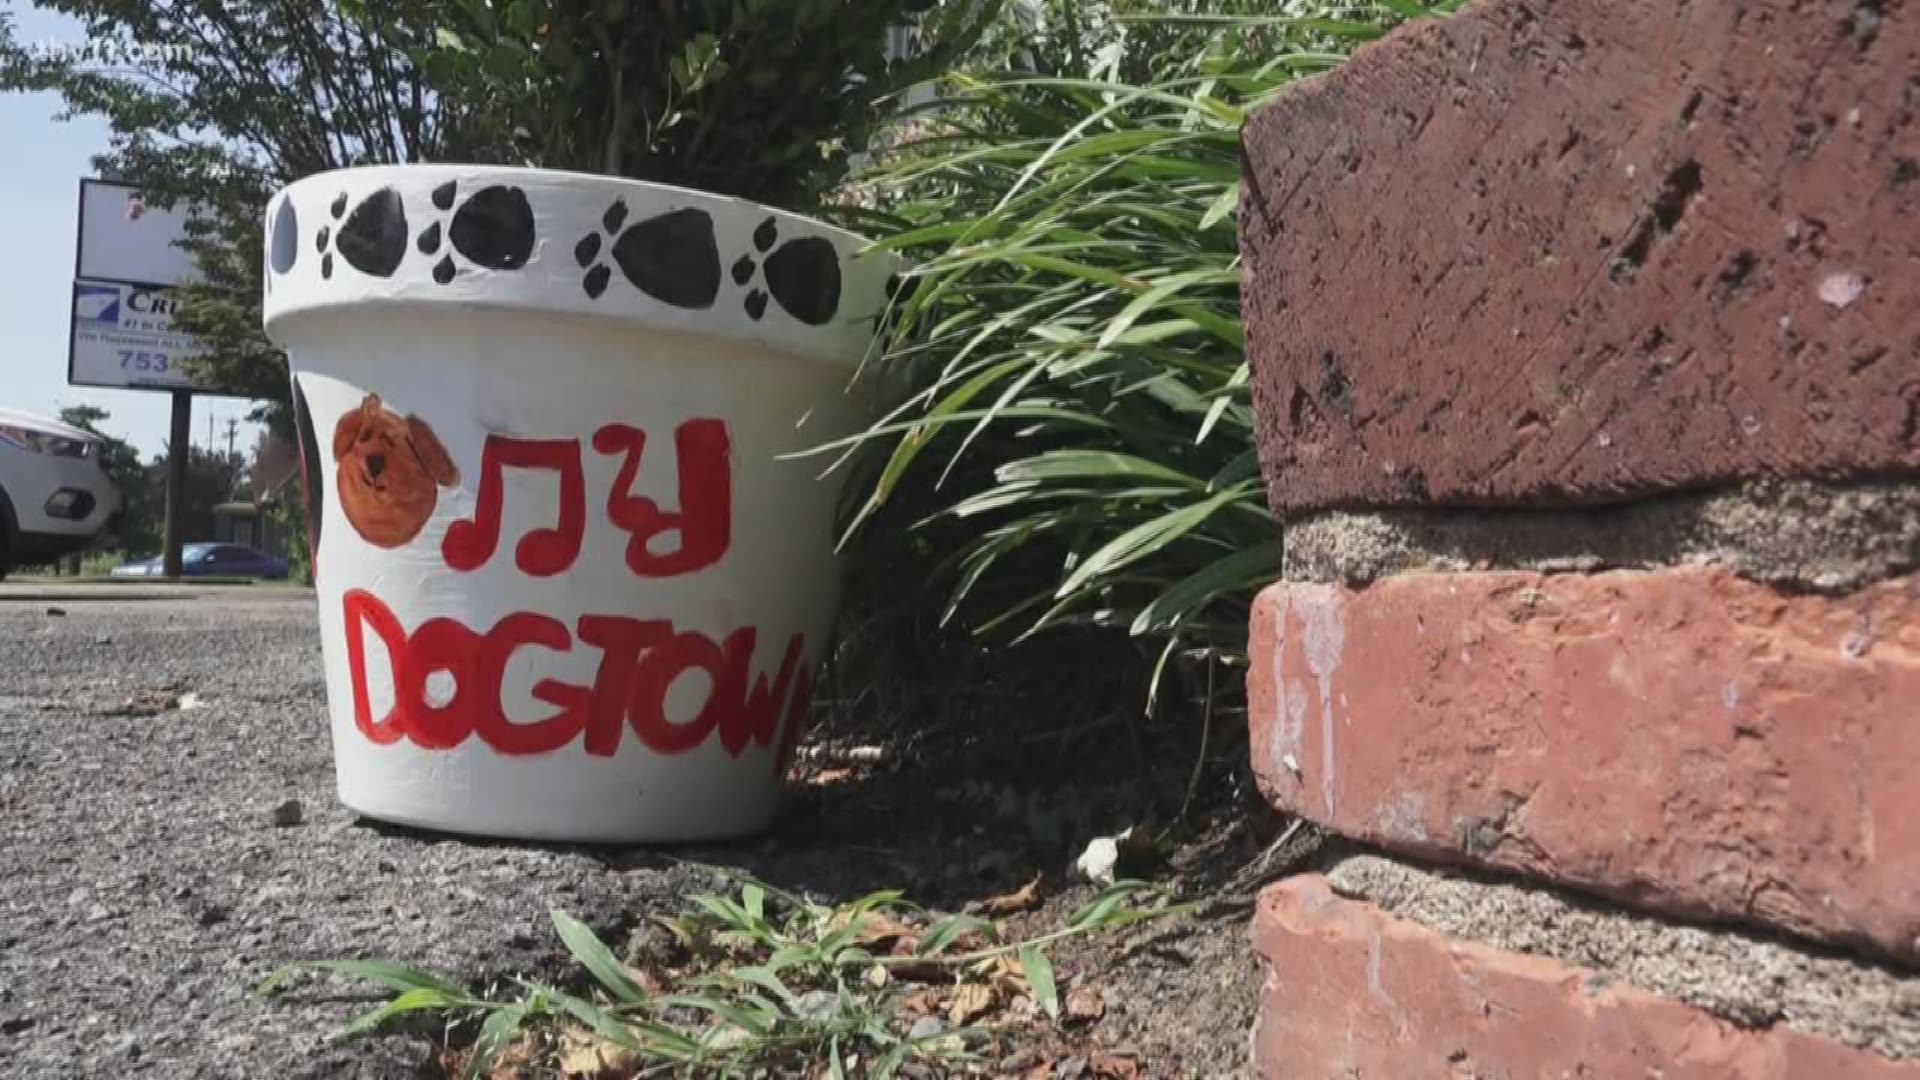 Flower pots outside North Little Rock businesses beautify the area with local art.